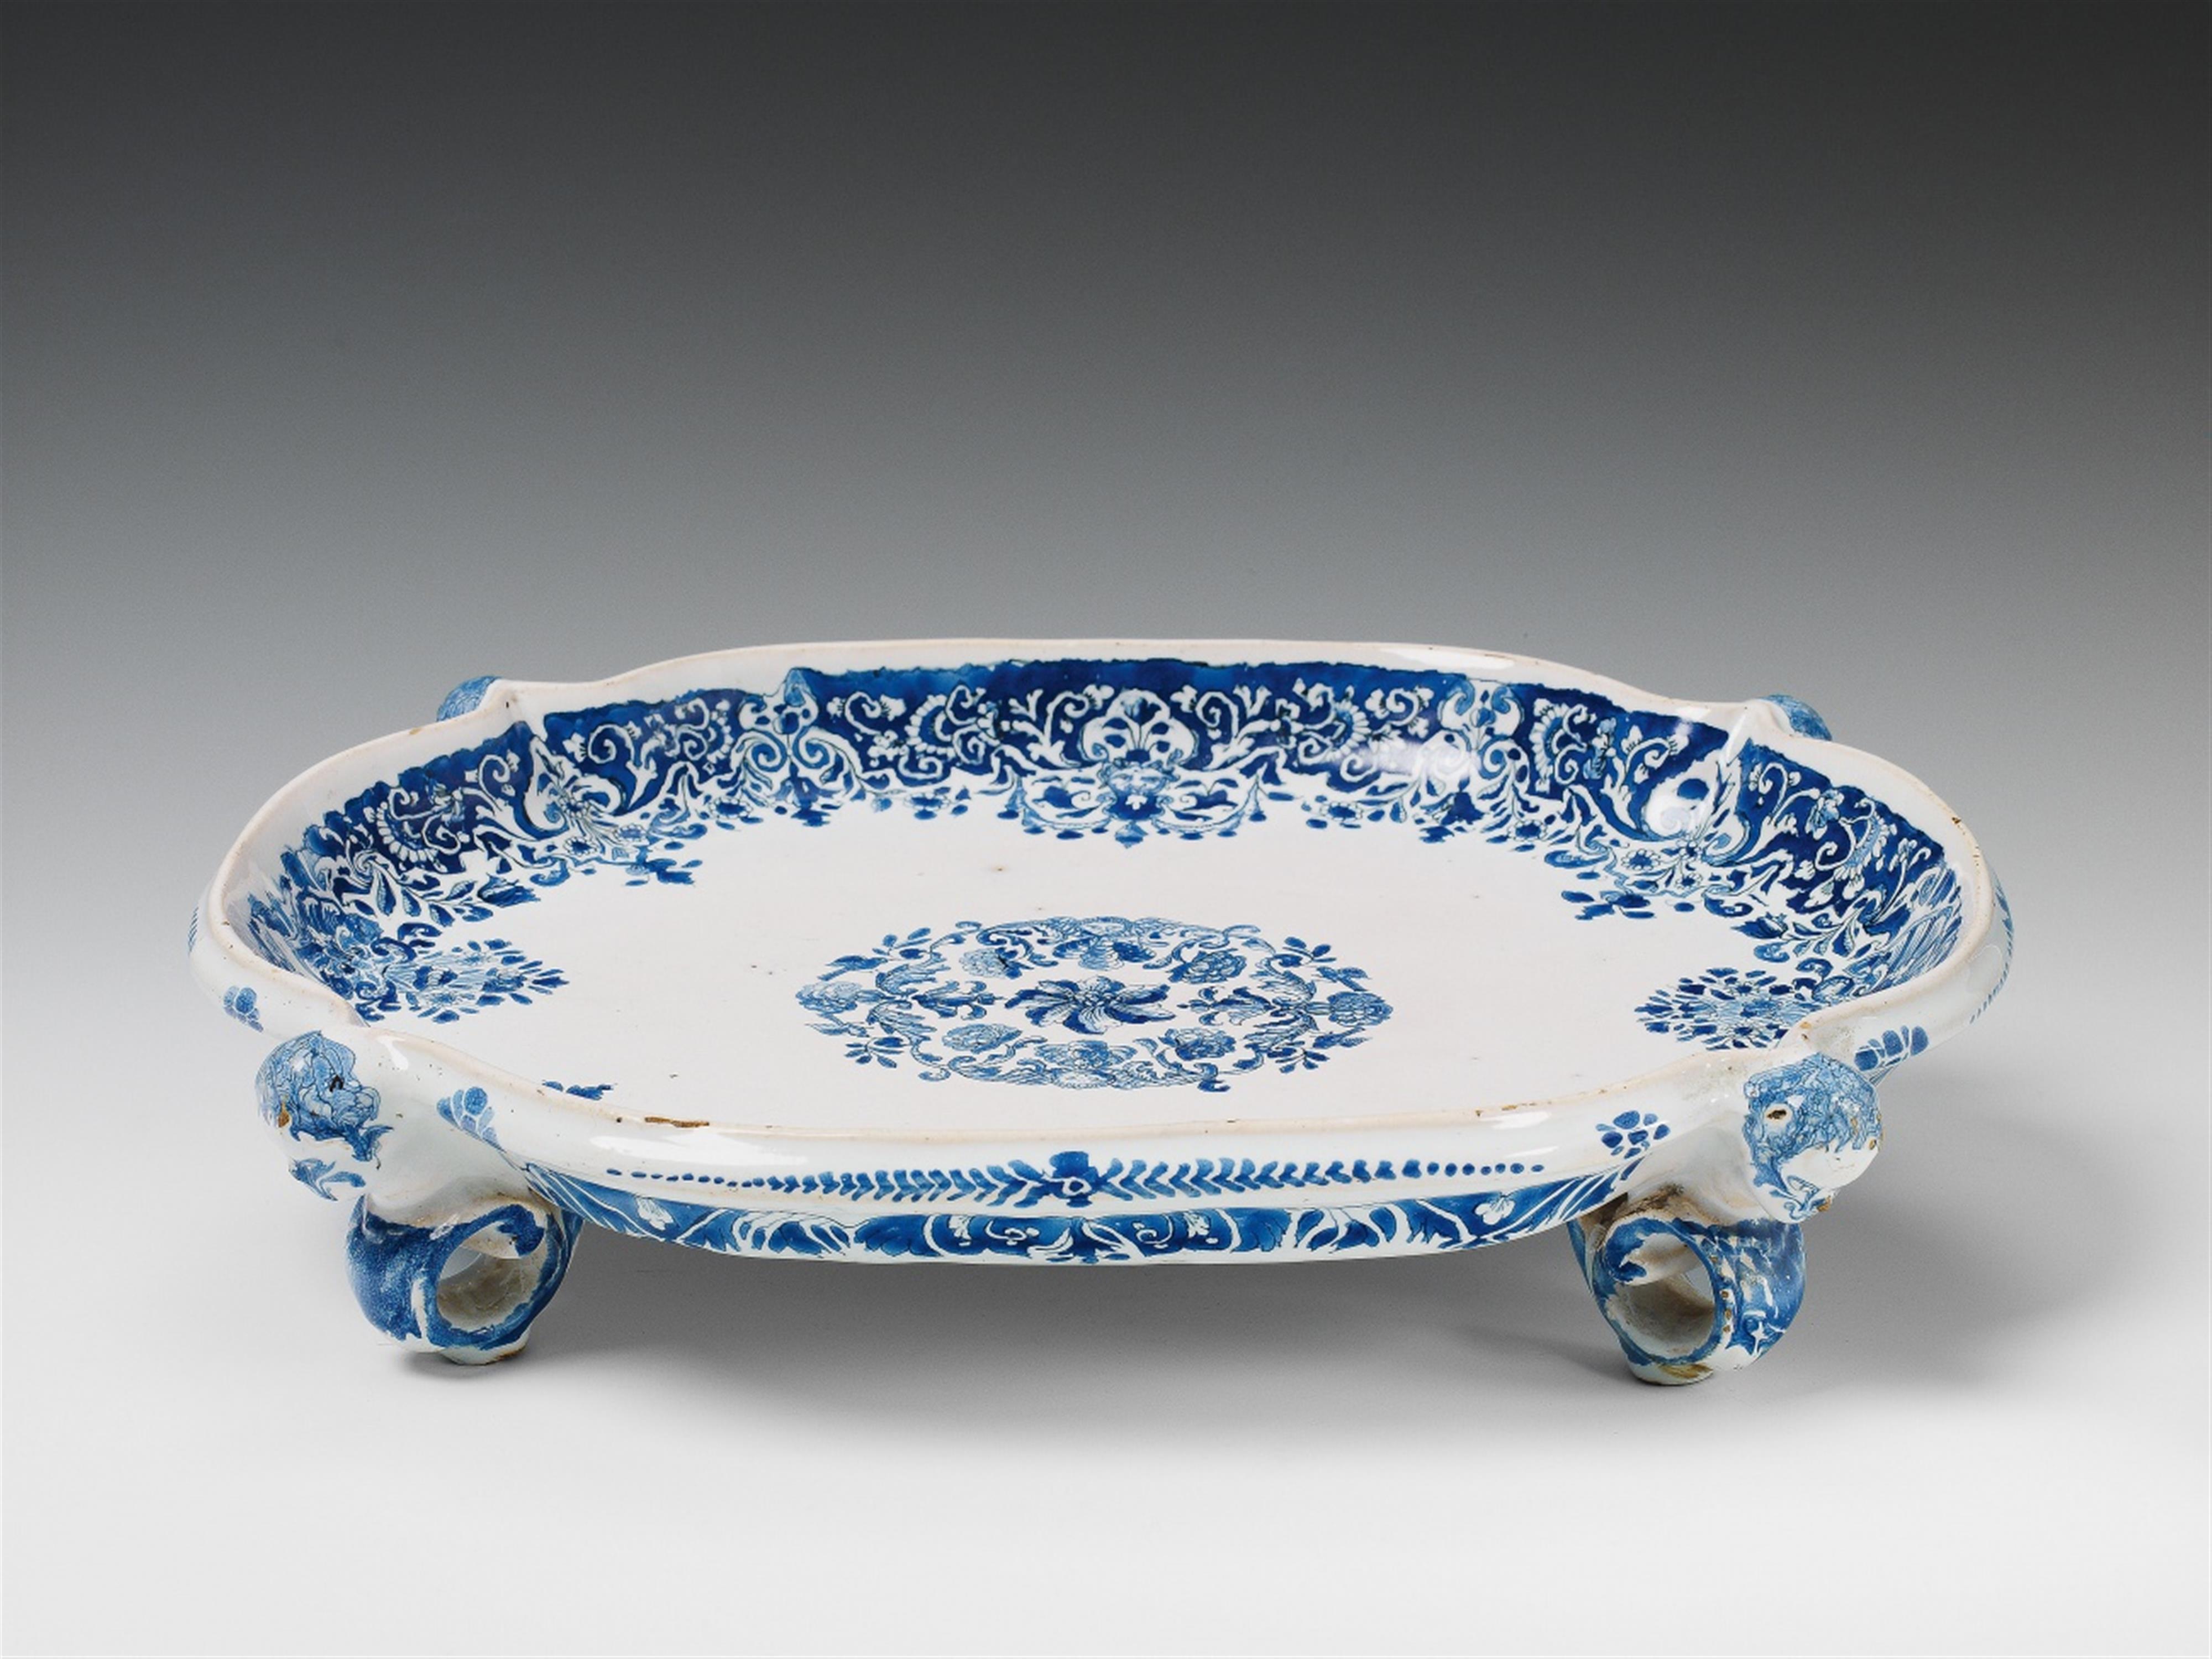 A Strasbourg faience table centrepiece with "grand feu" lambrequin decor - image-1